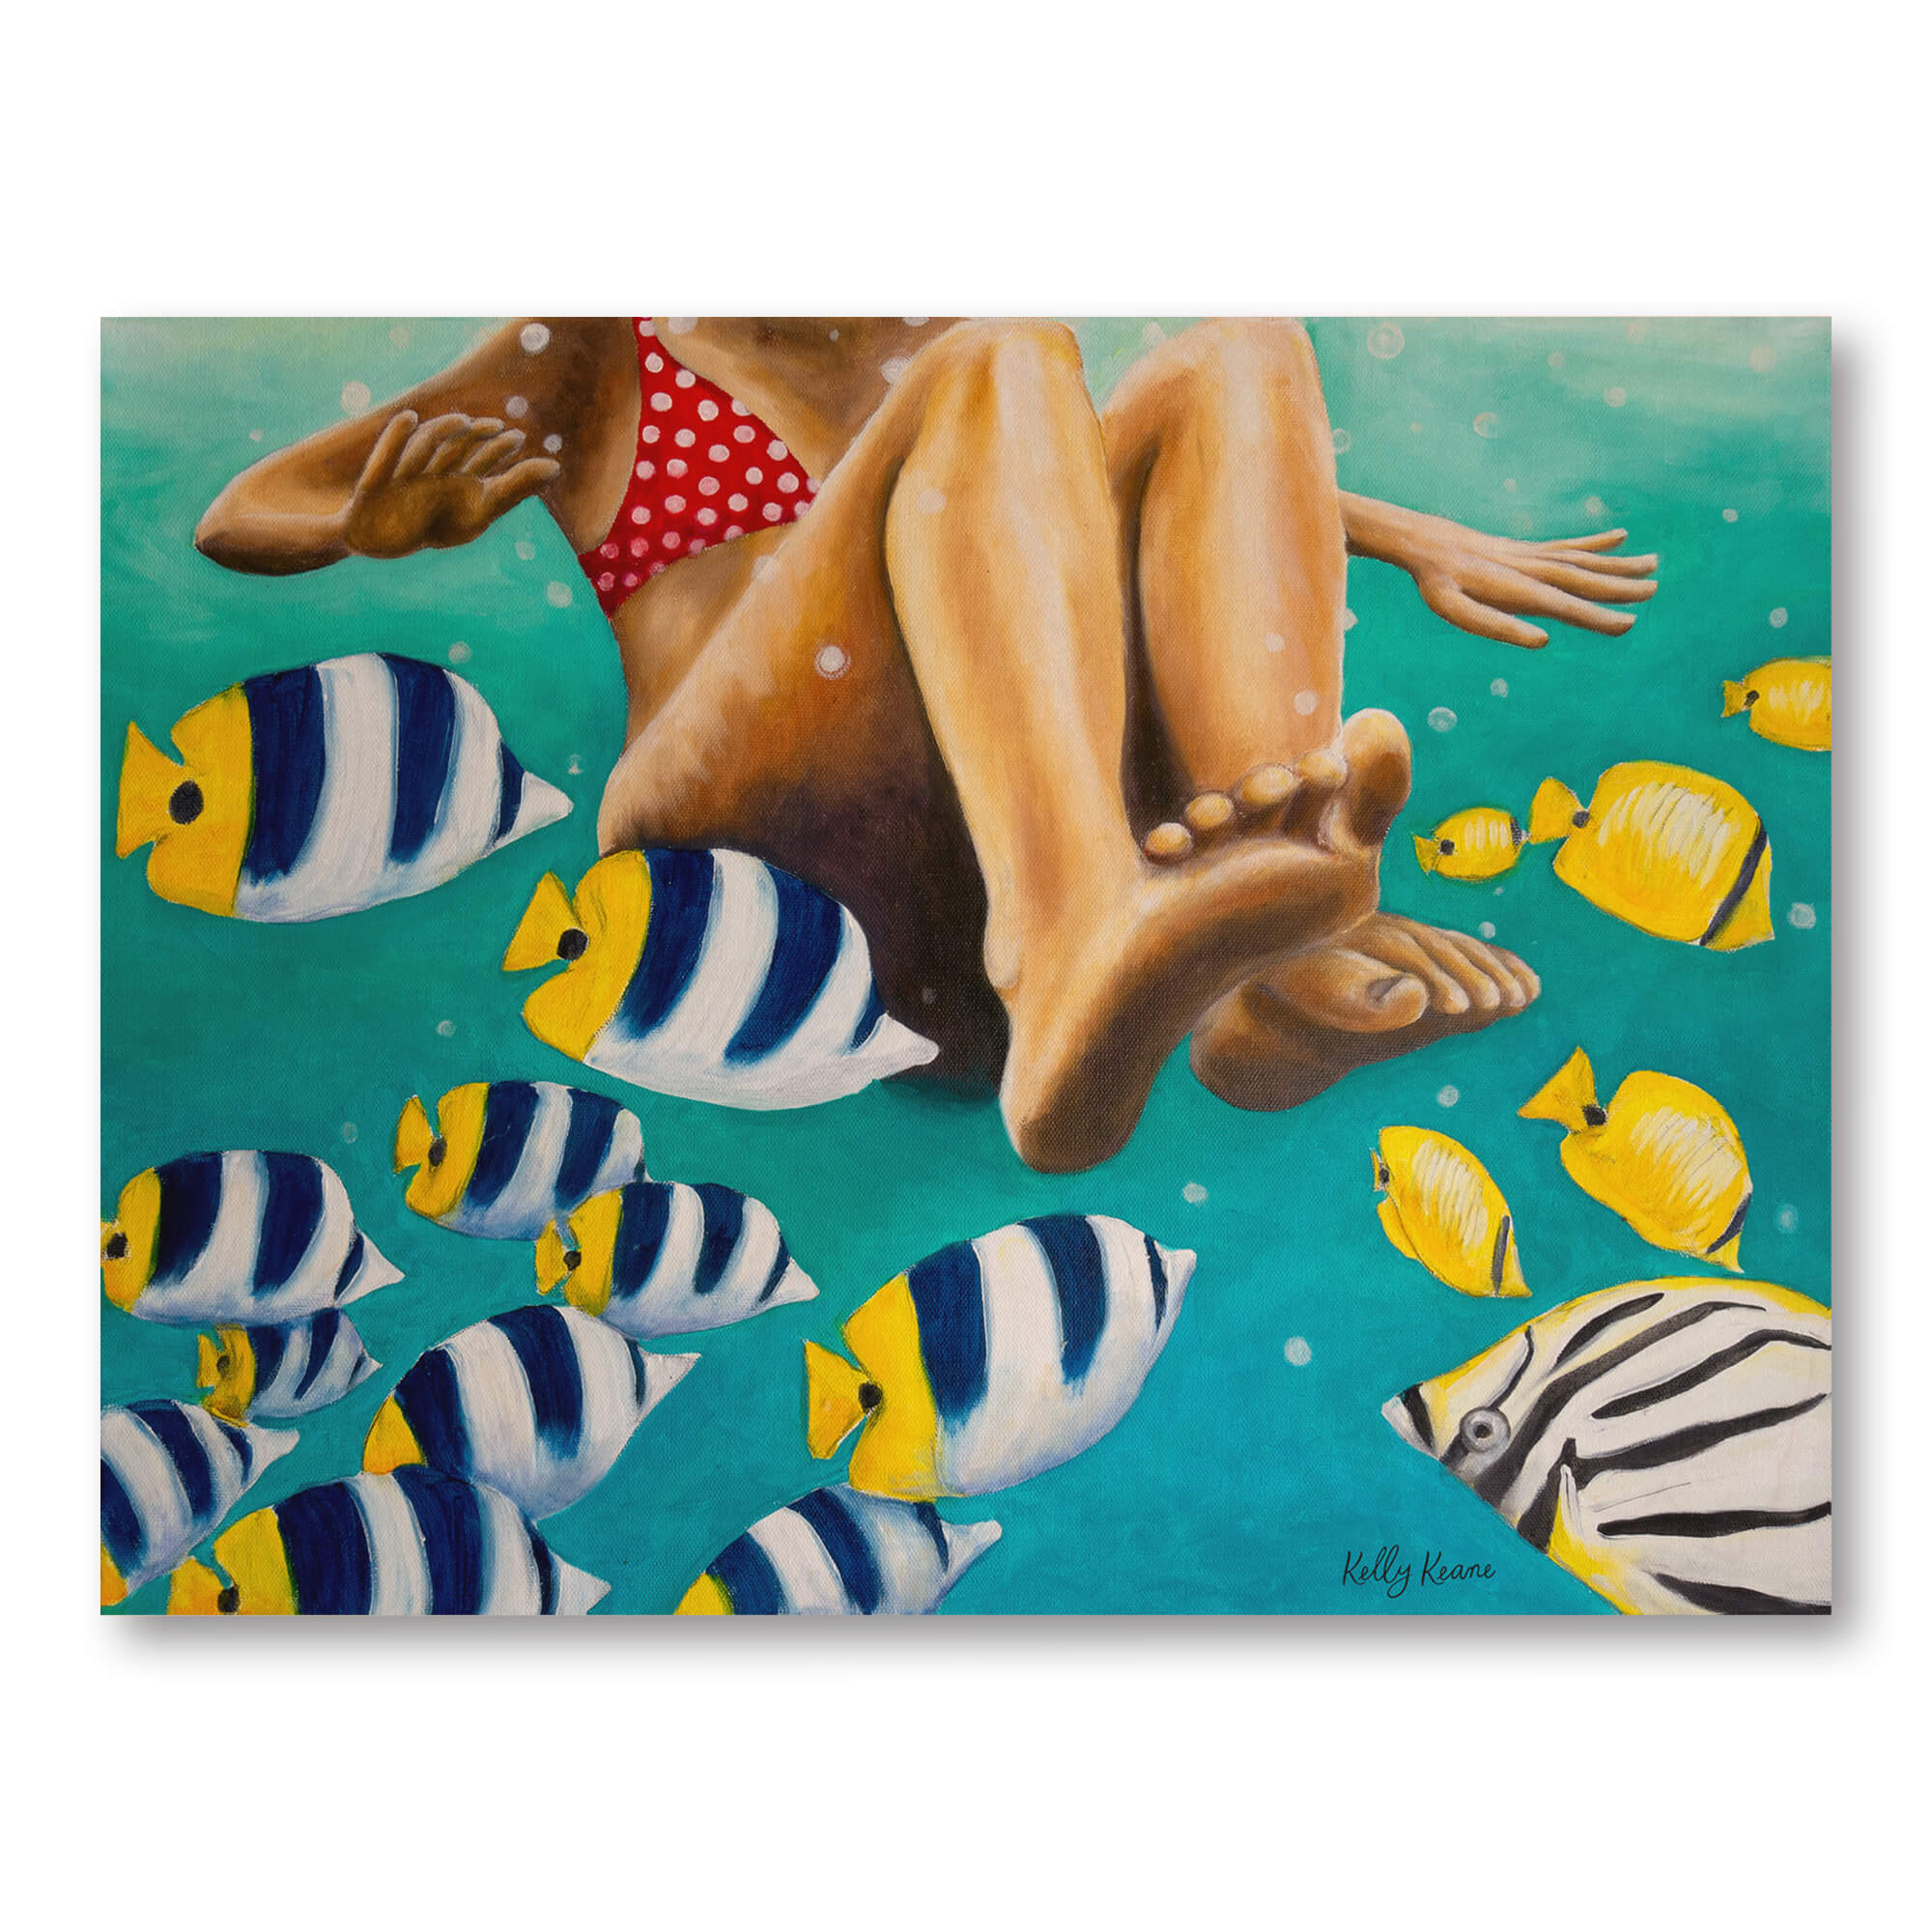 Birch wood print of a woman wearing red bikini hovering over the ocean floor with colorful fish around by Hawaii artist Kelly Keane